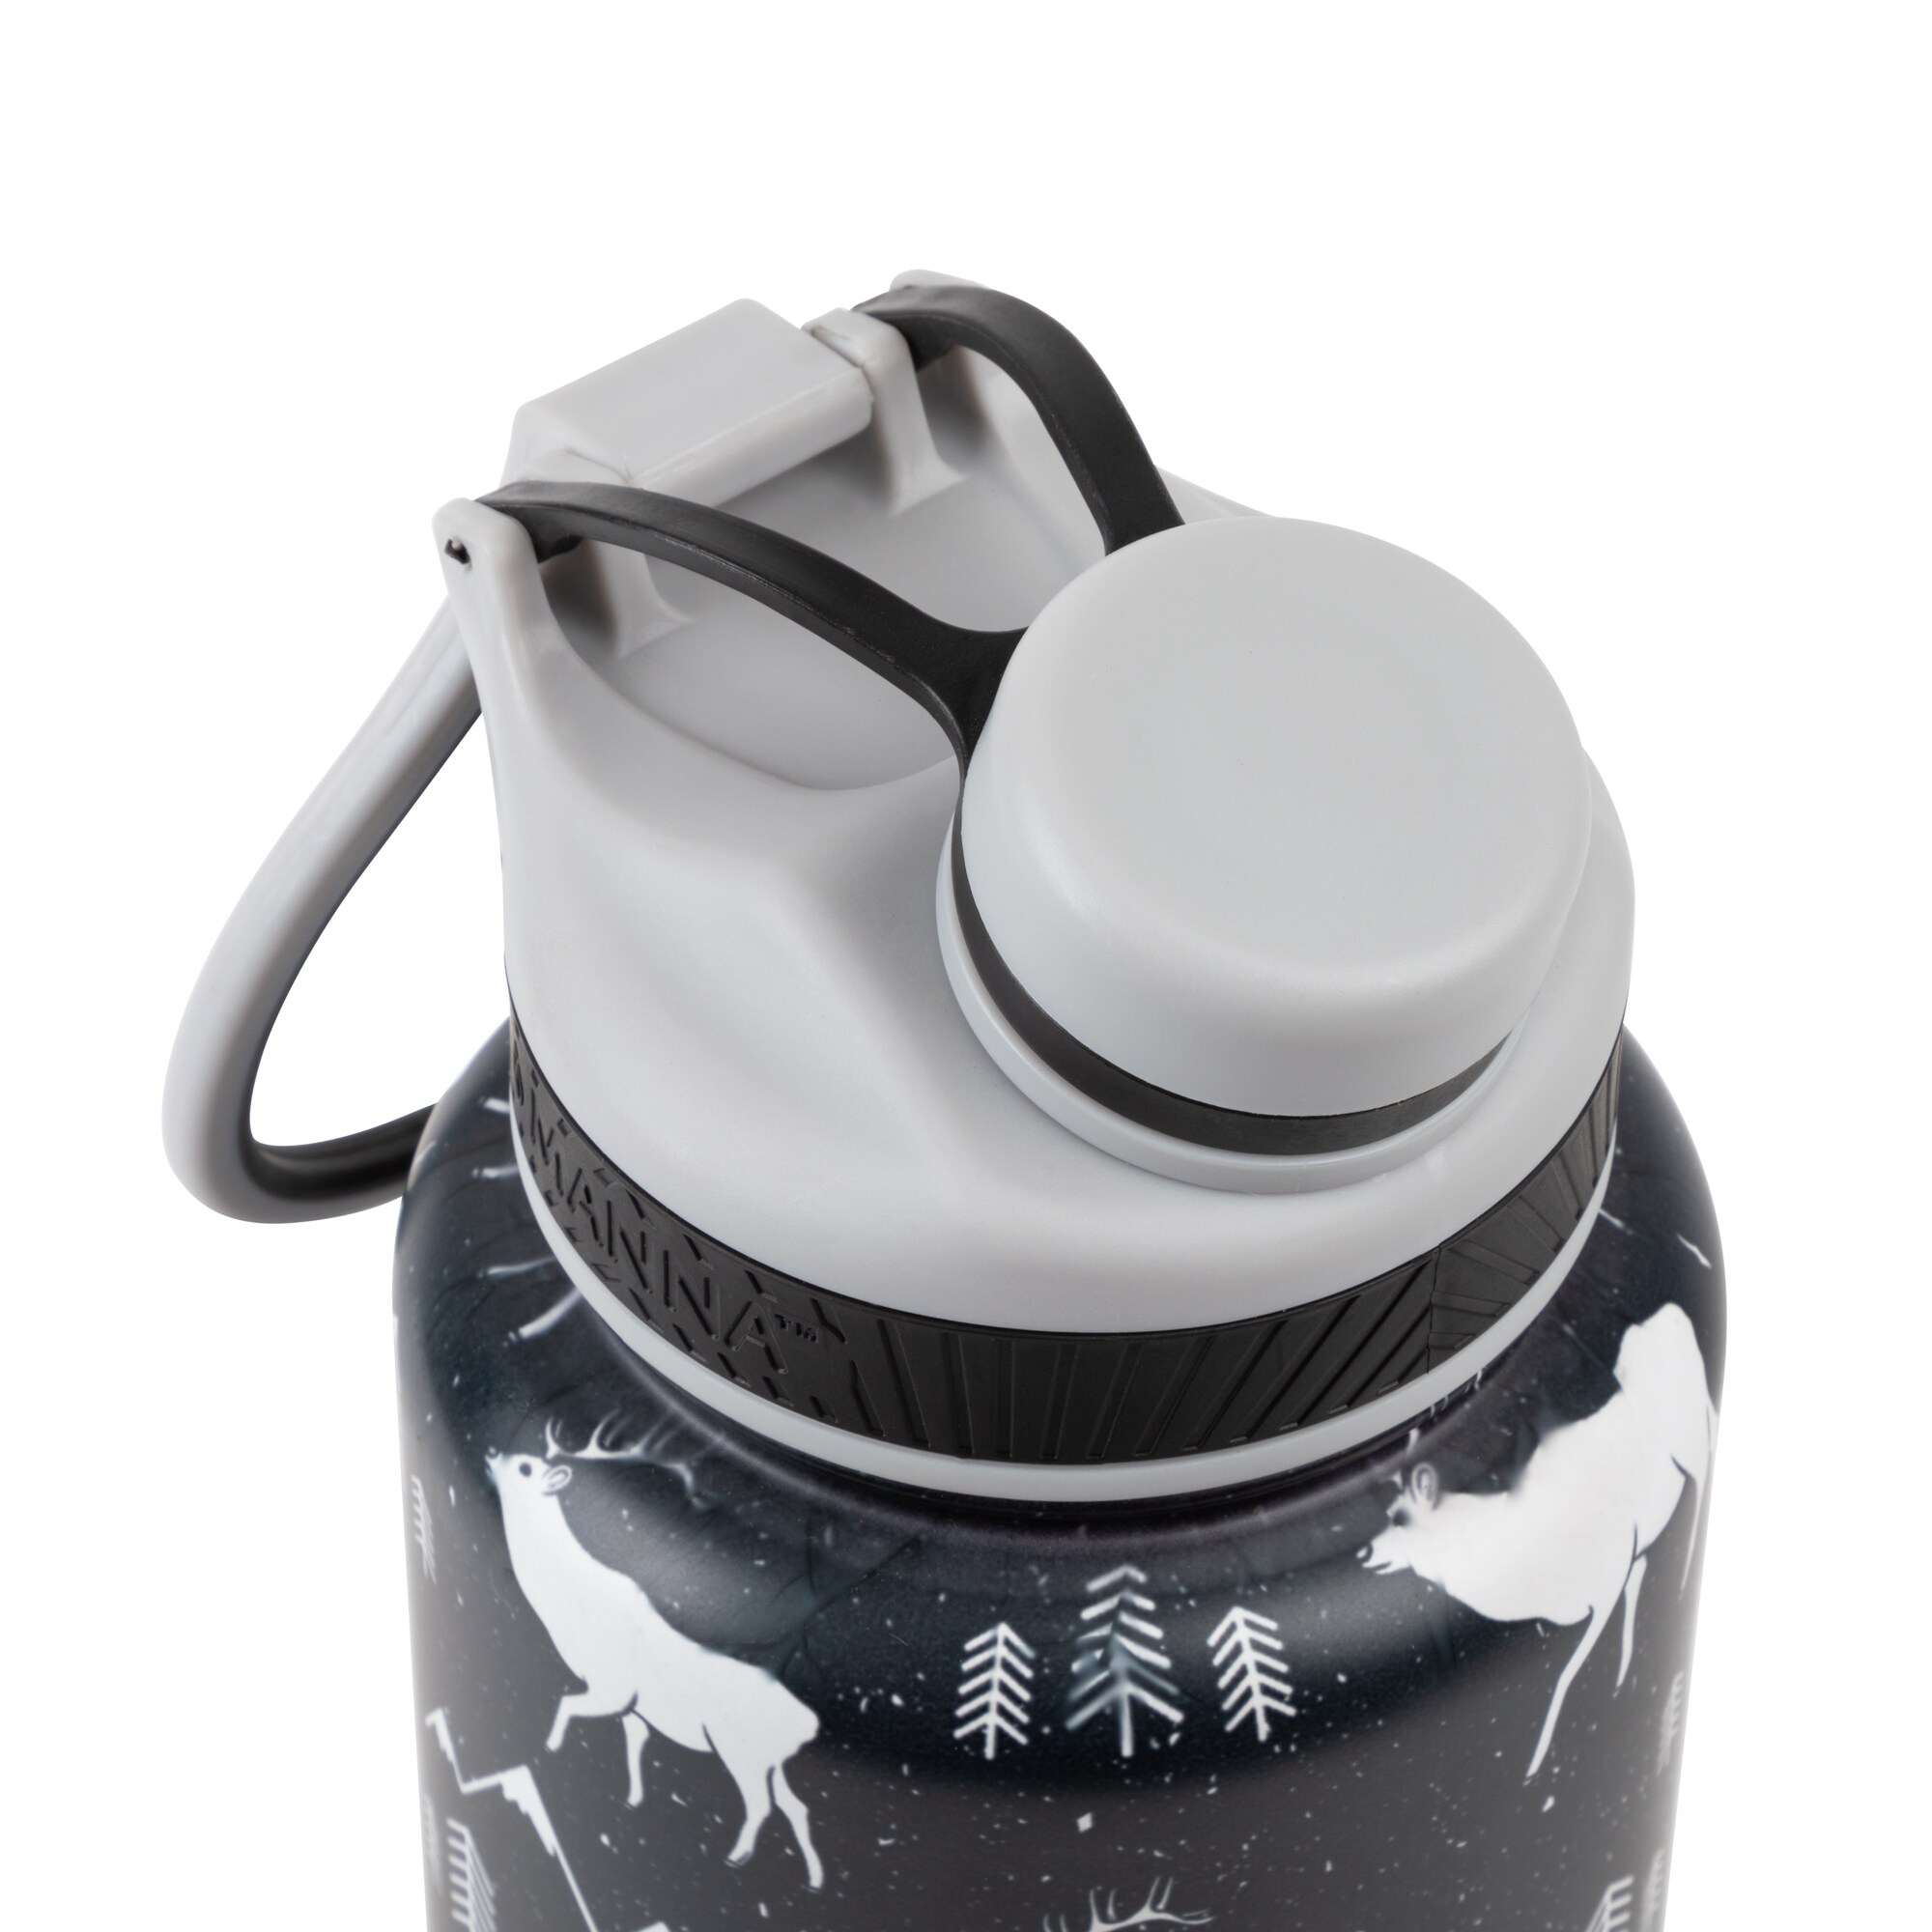 Manna Ranger Pro 40 oz. Stainless and Navy Stainless Steel Vacuum